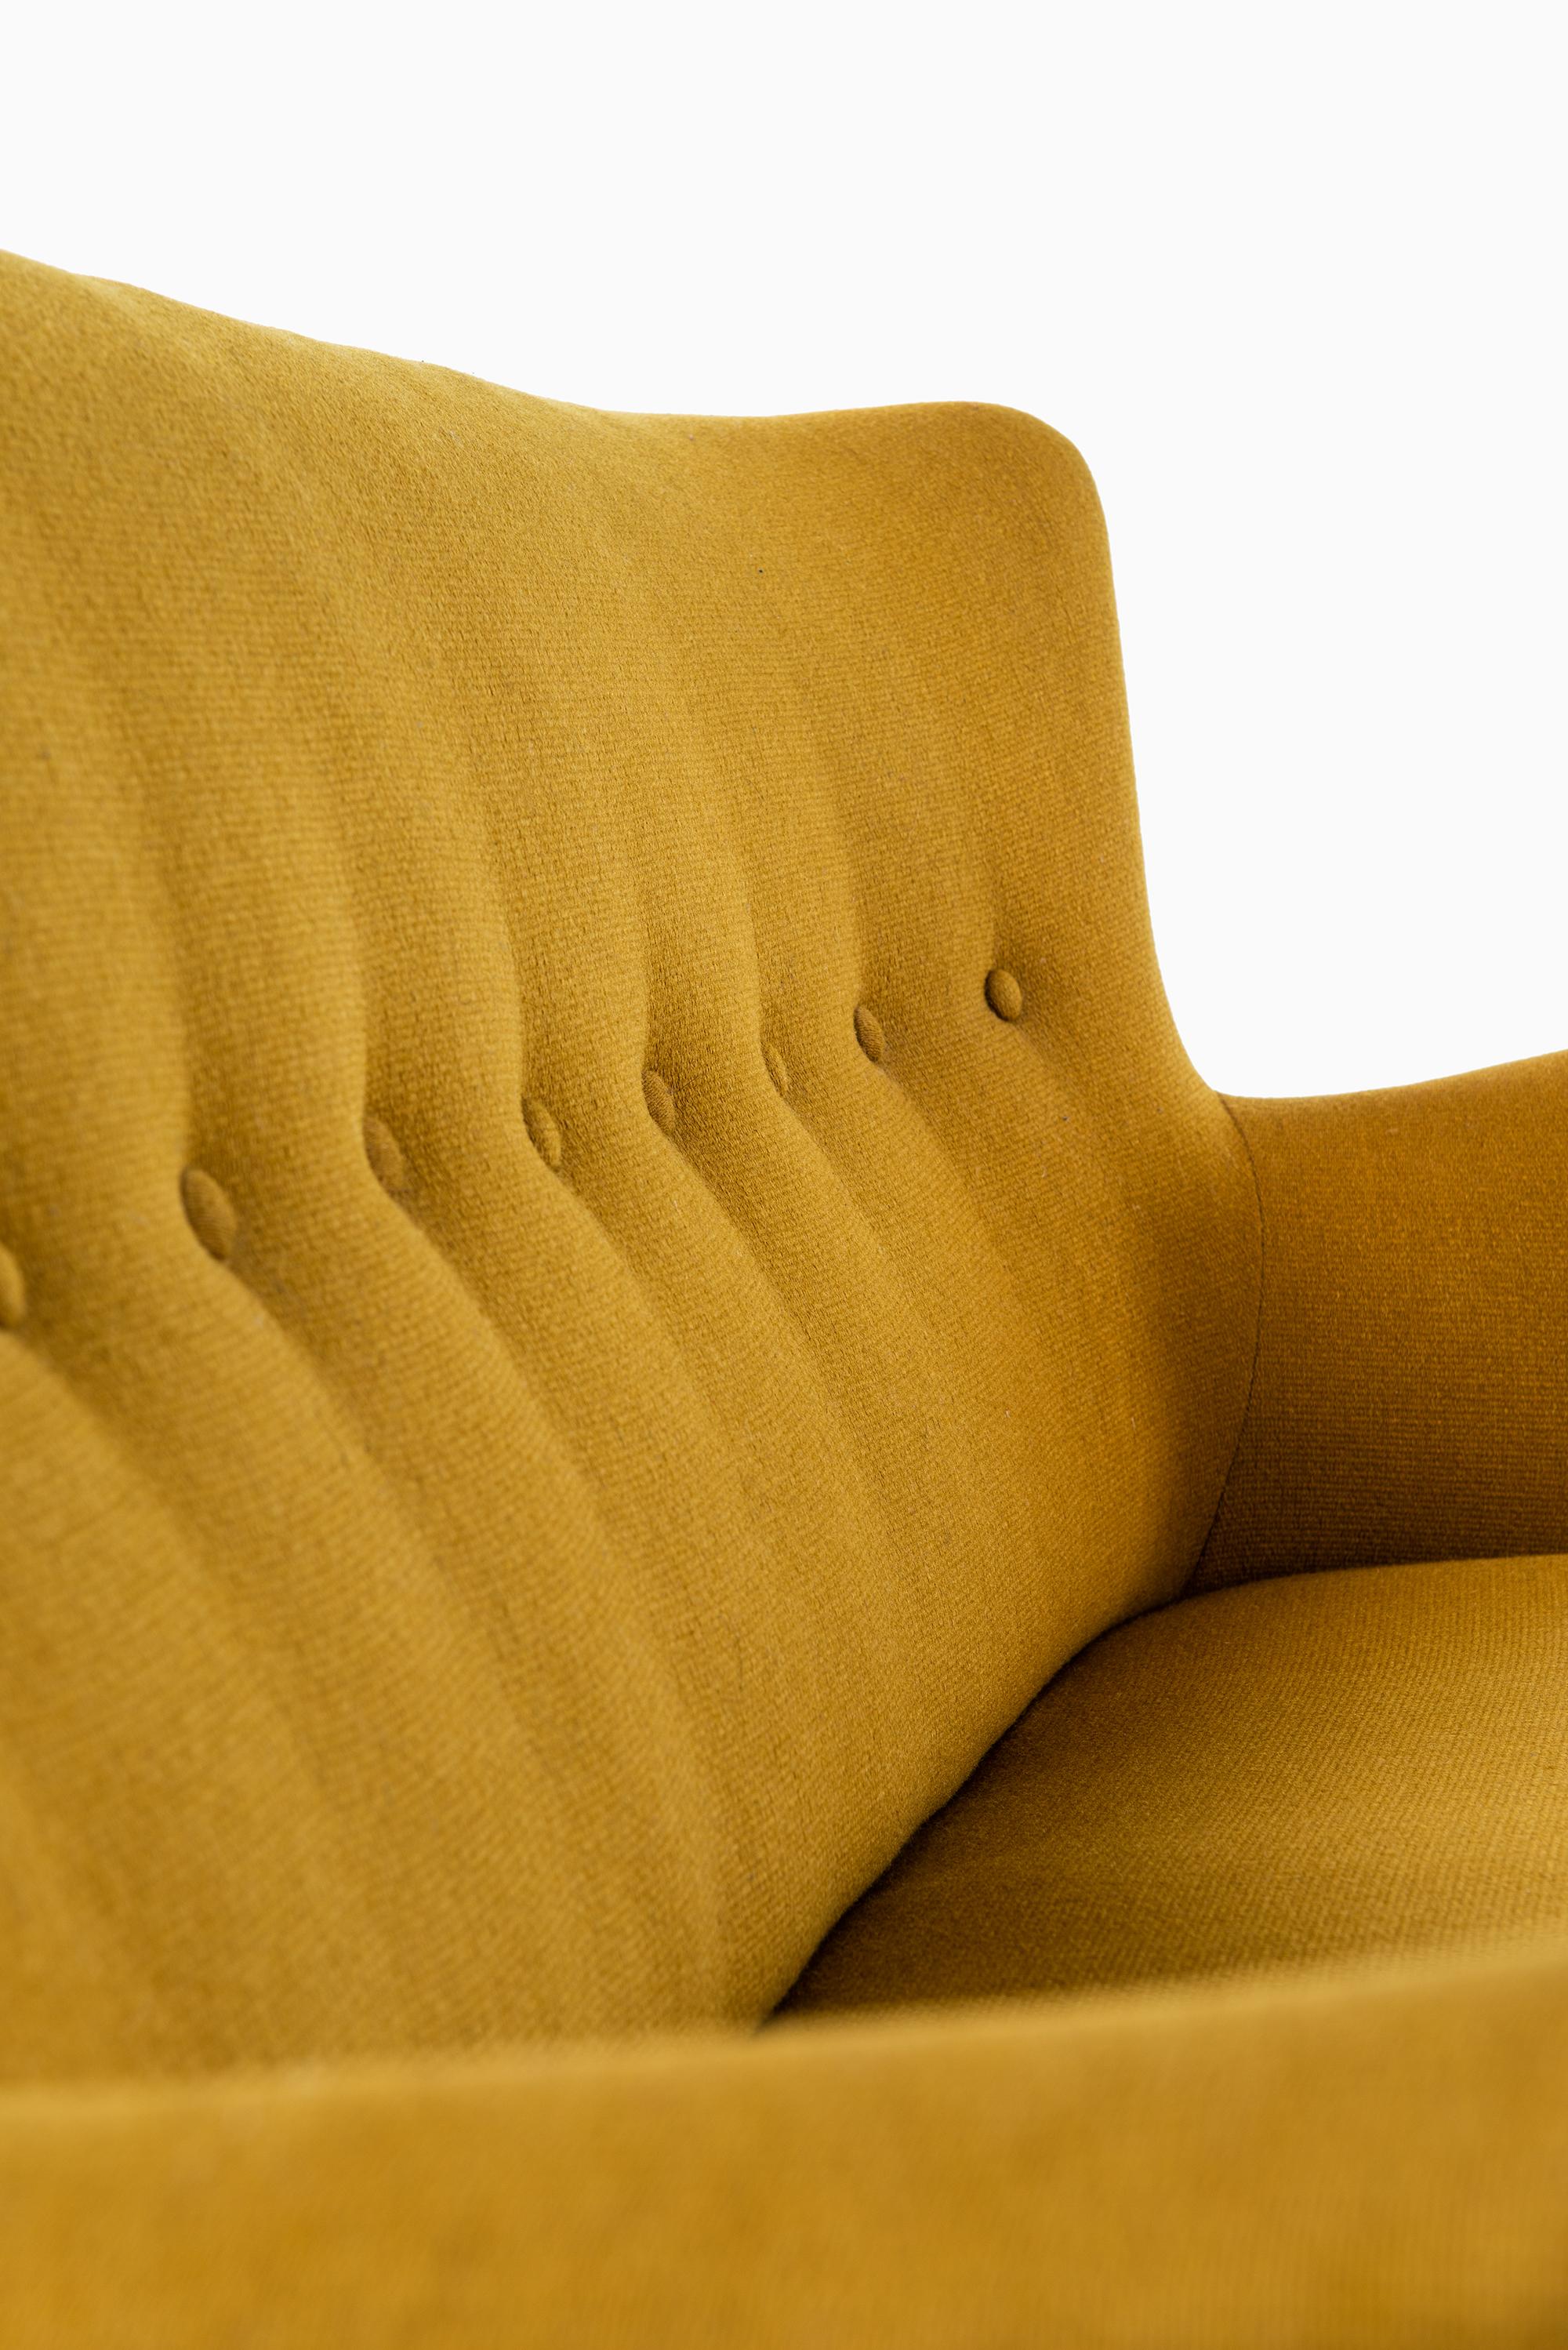 Fabric Sofa Attributed to Kurt Olsen and Produced in Denmark